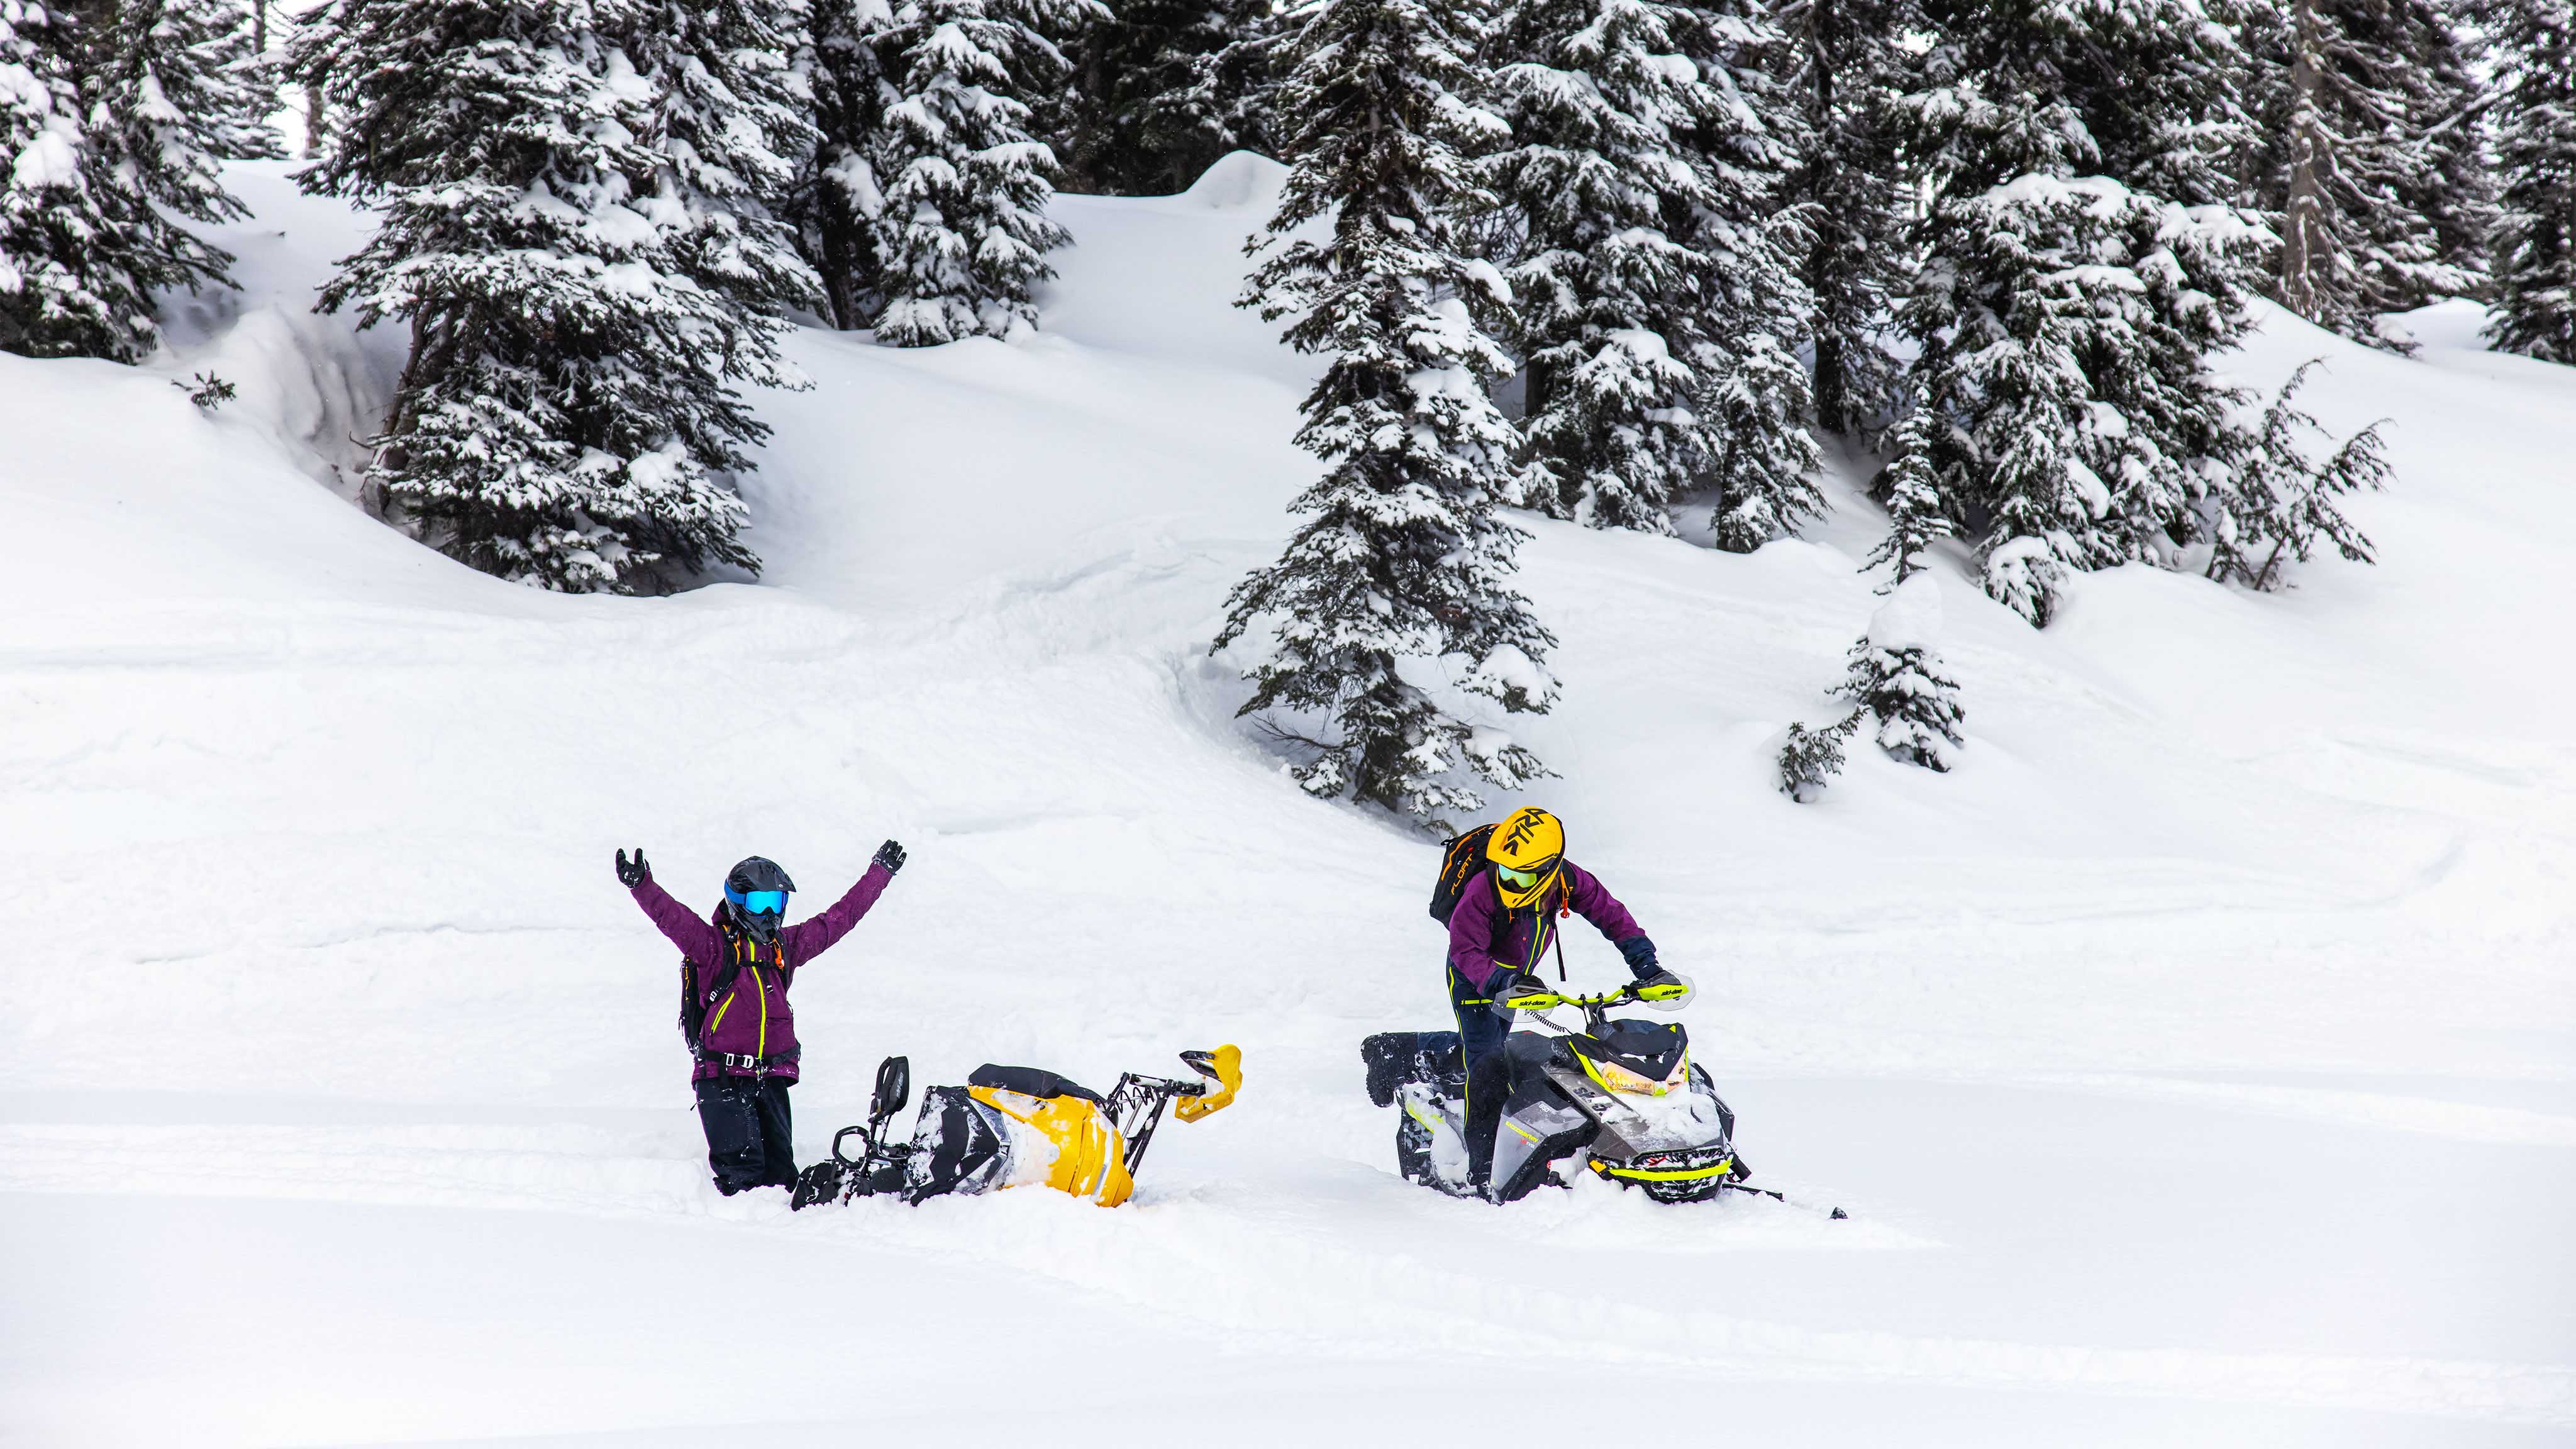 Two women learning to ride Ski-Doo snowmobiles in Deep Snow